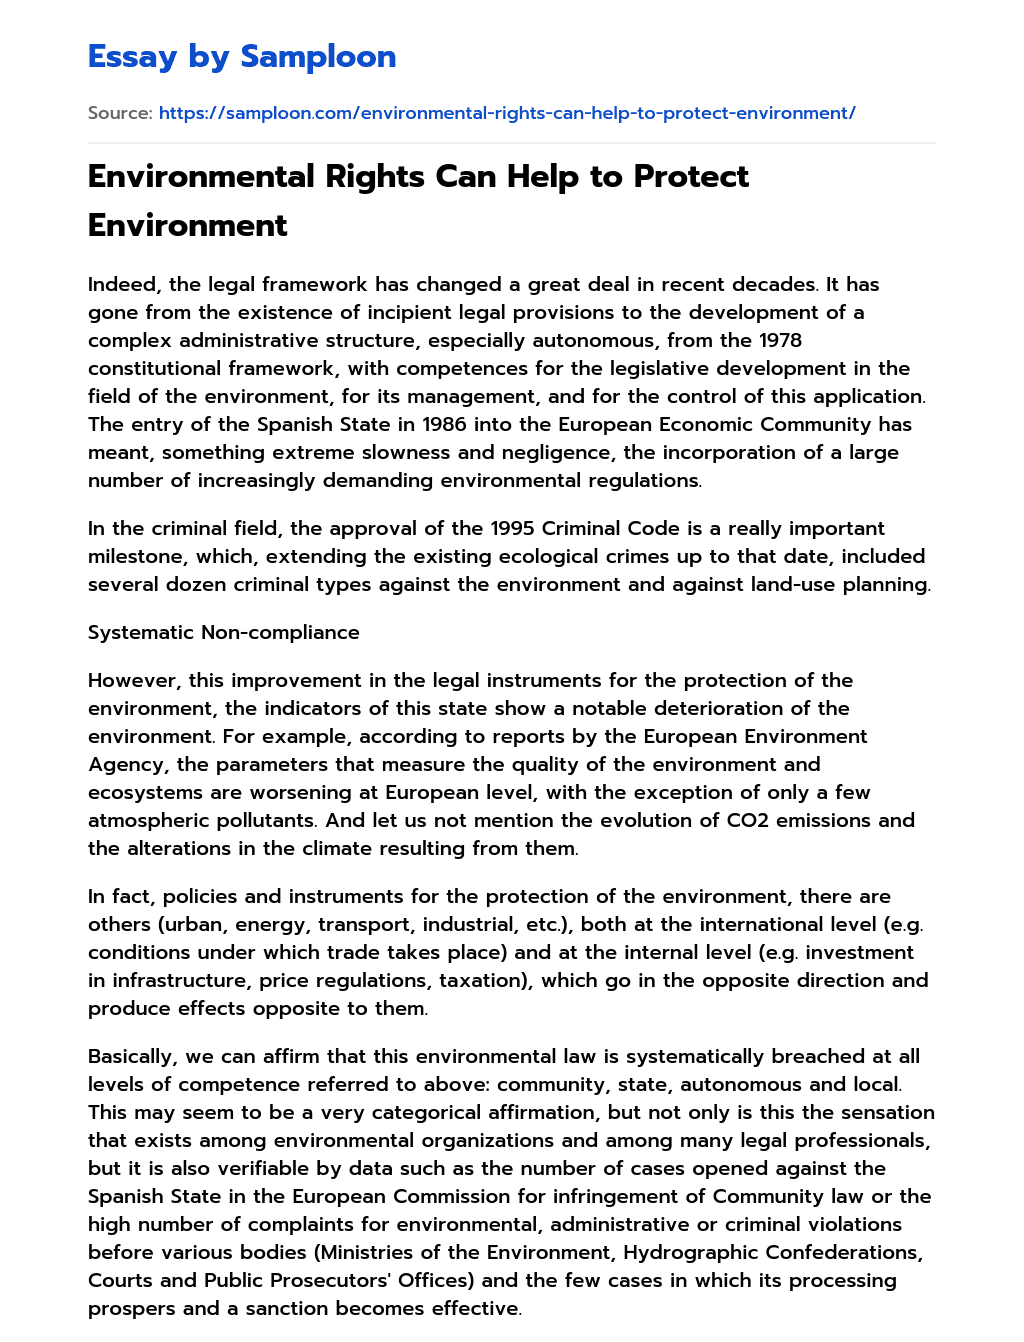 Environmental Rights Can Help to Protect Environment essay